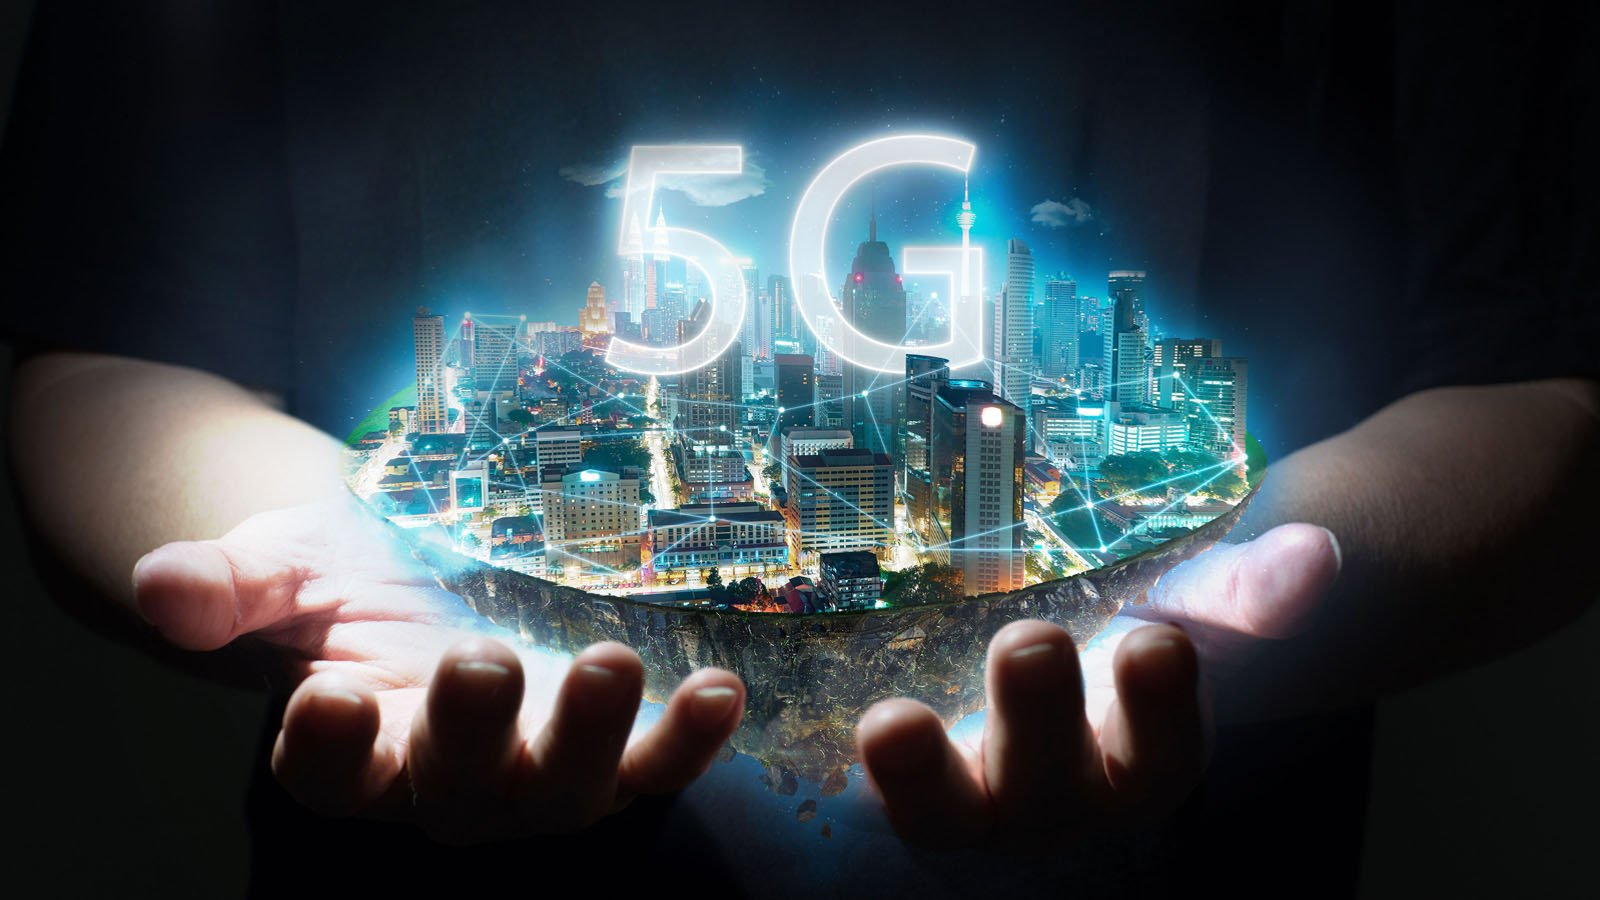 7 Great Etfs To Buy For The Rise Of 5g Fivg Nxtg Snsr Investorplace